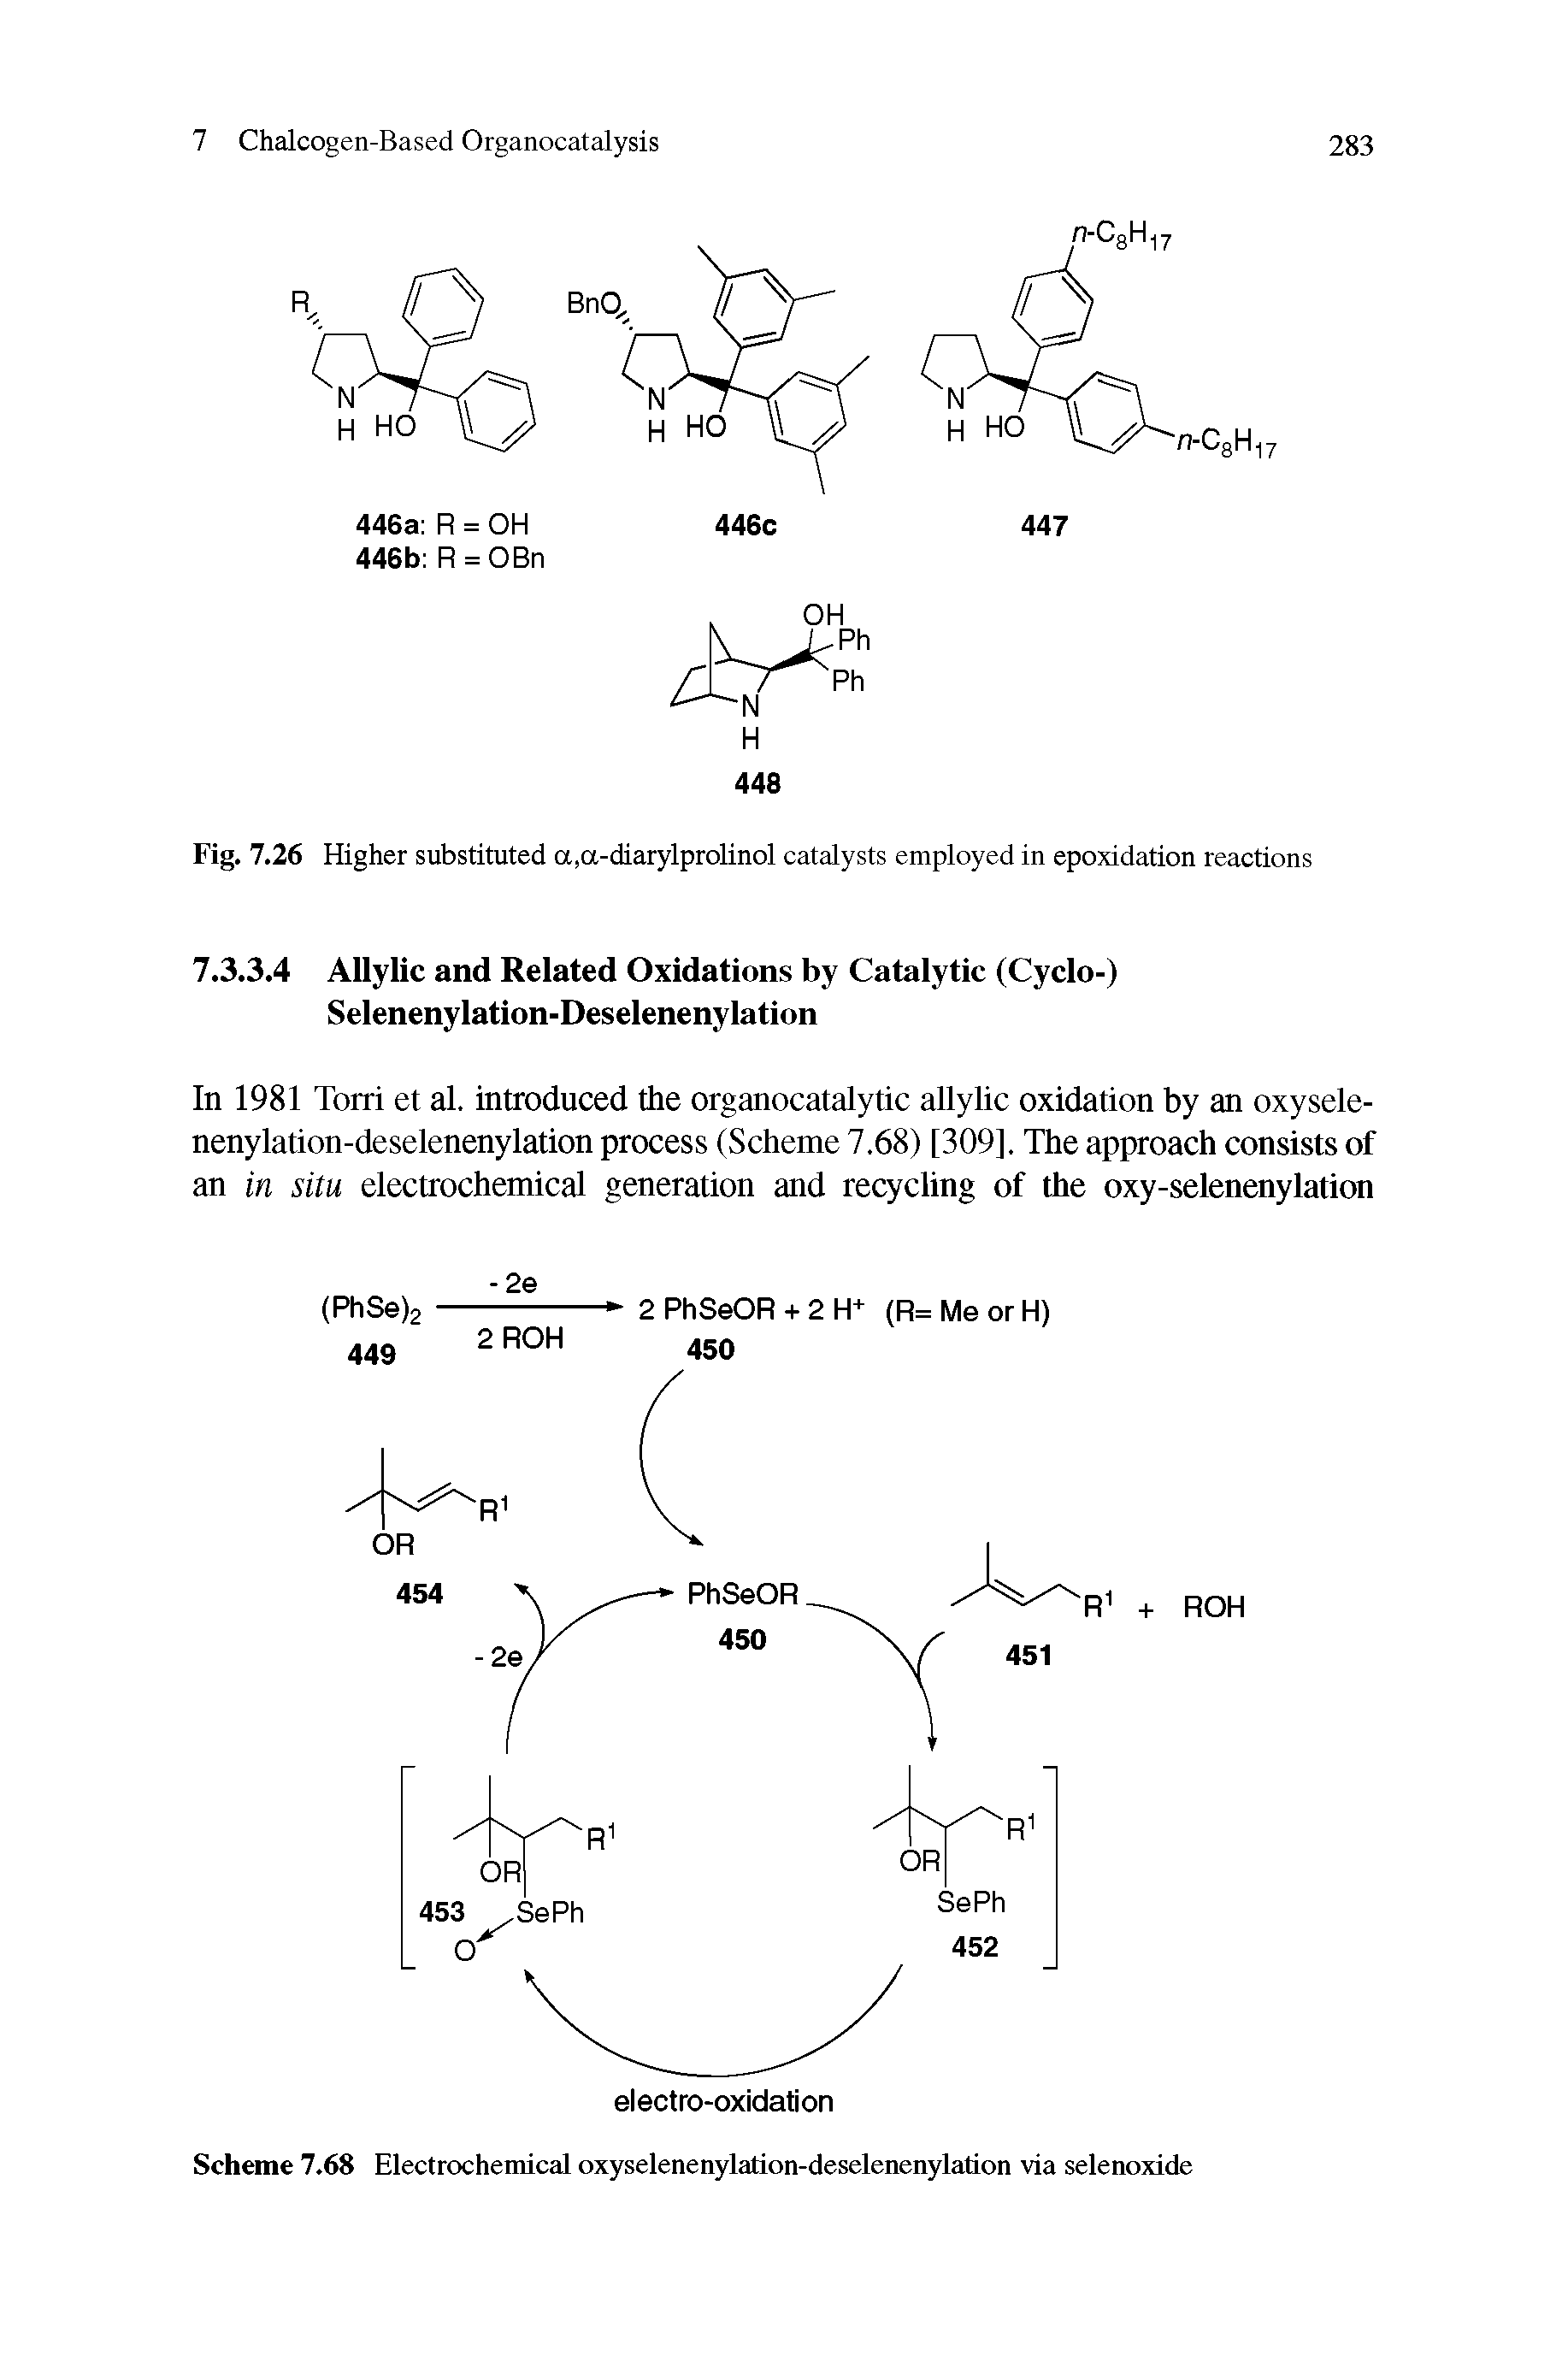 Fig. 7.26 Higher substituted a,a-diarylprolinol catalysts employed in epoxidation reactions...